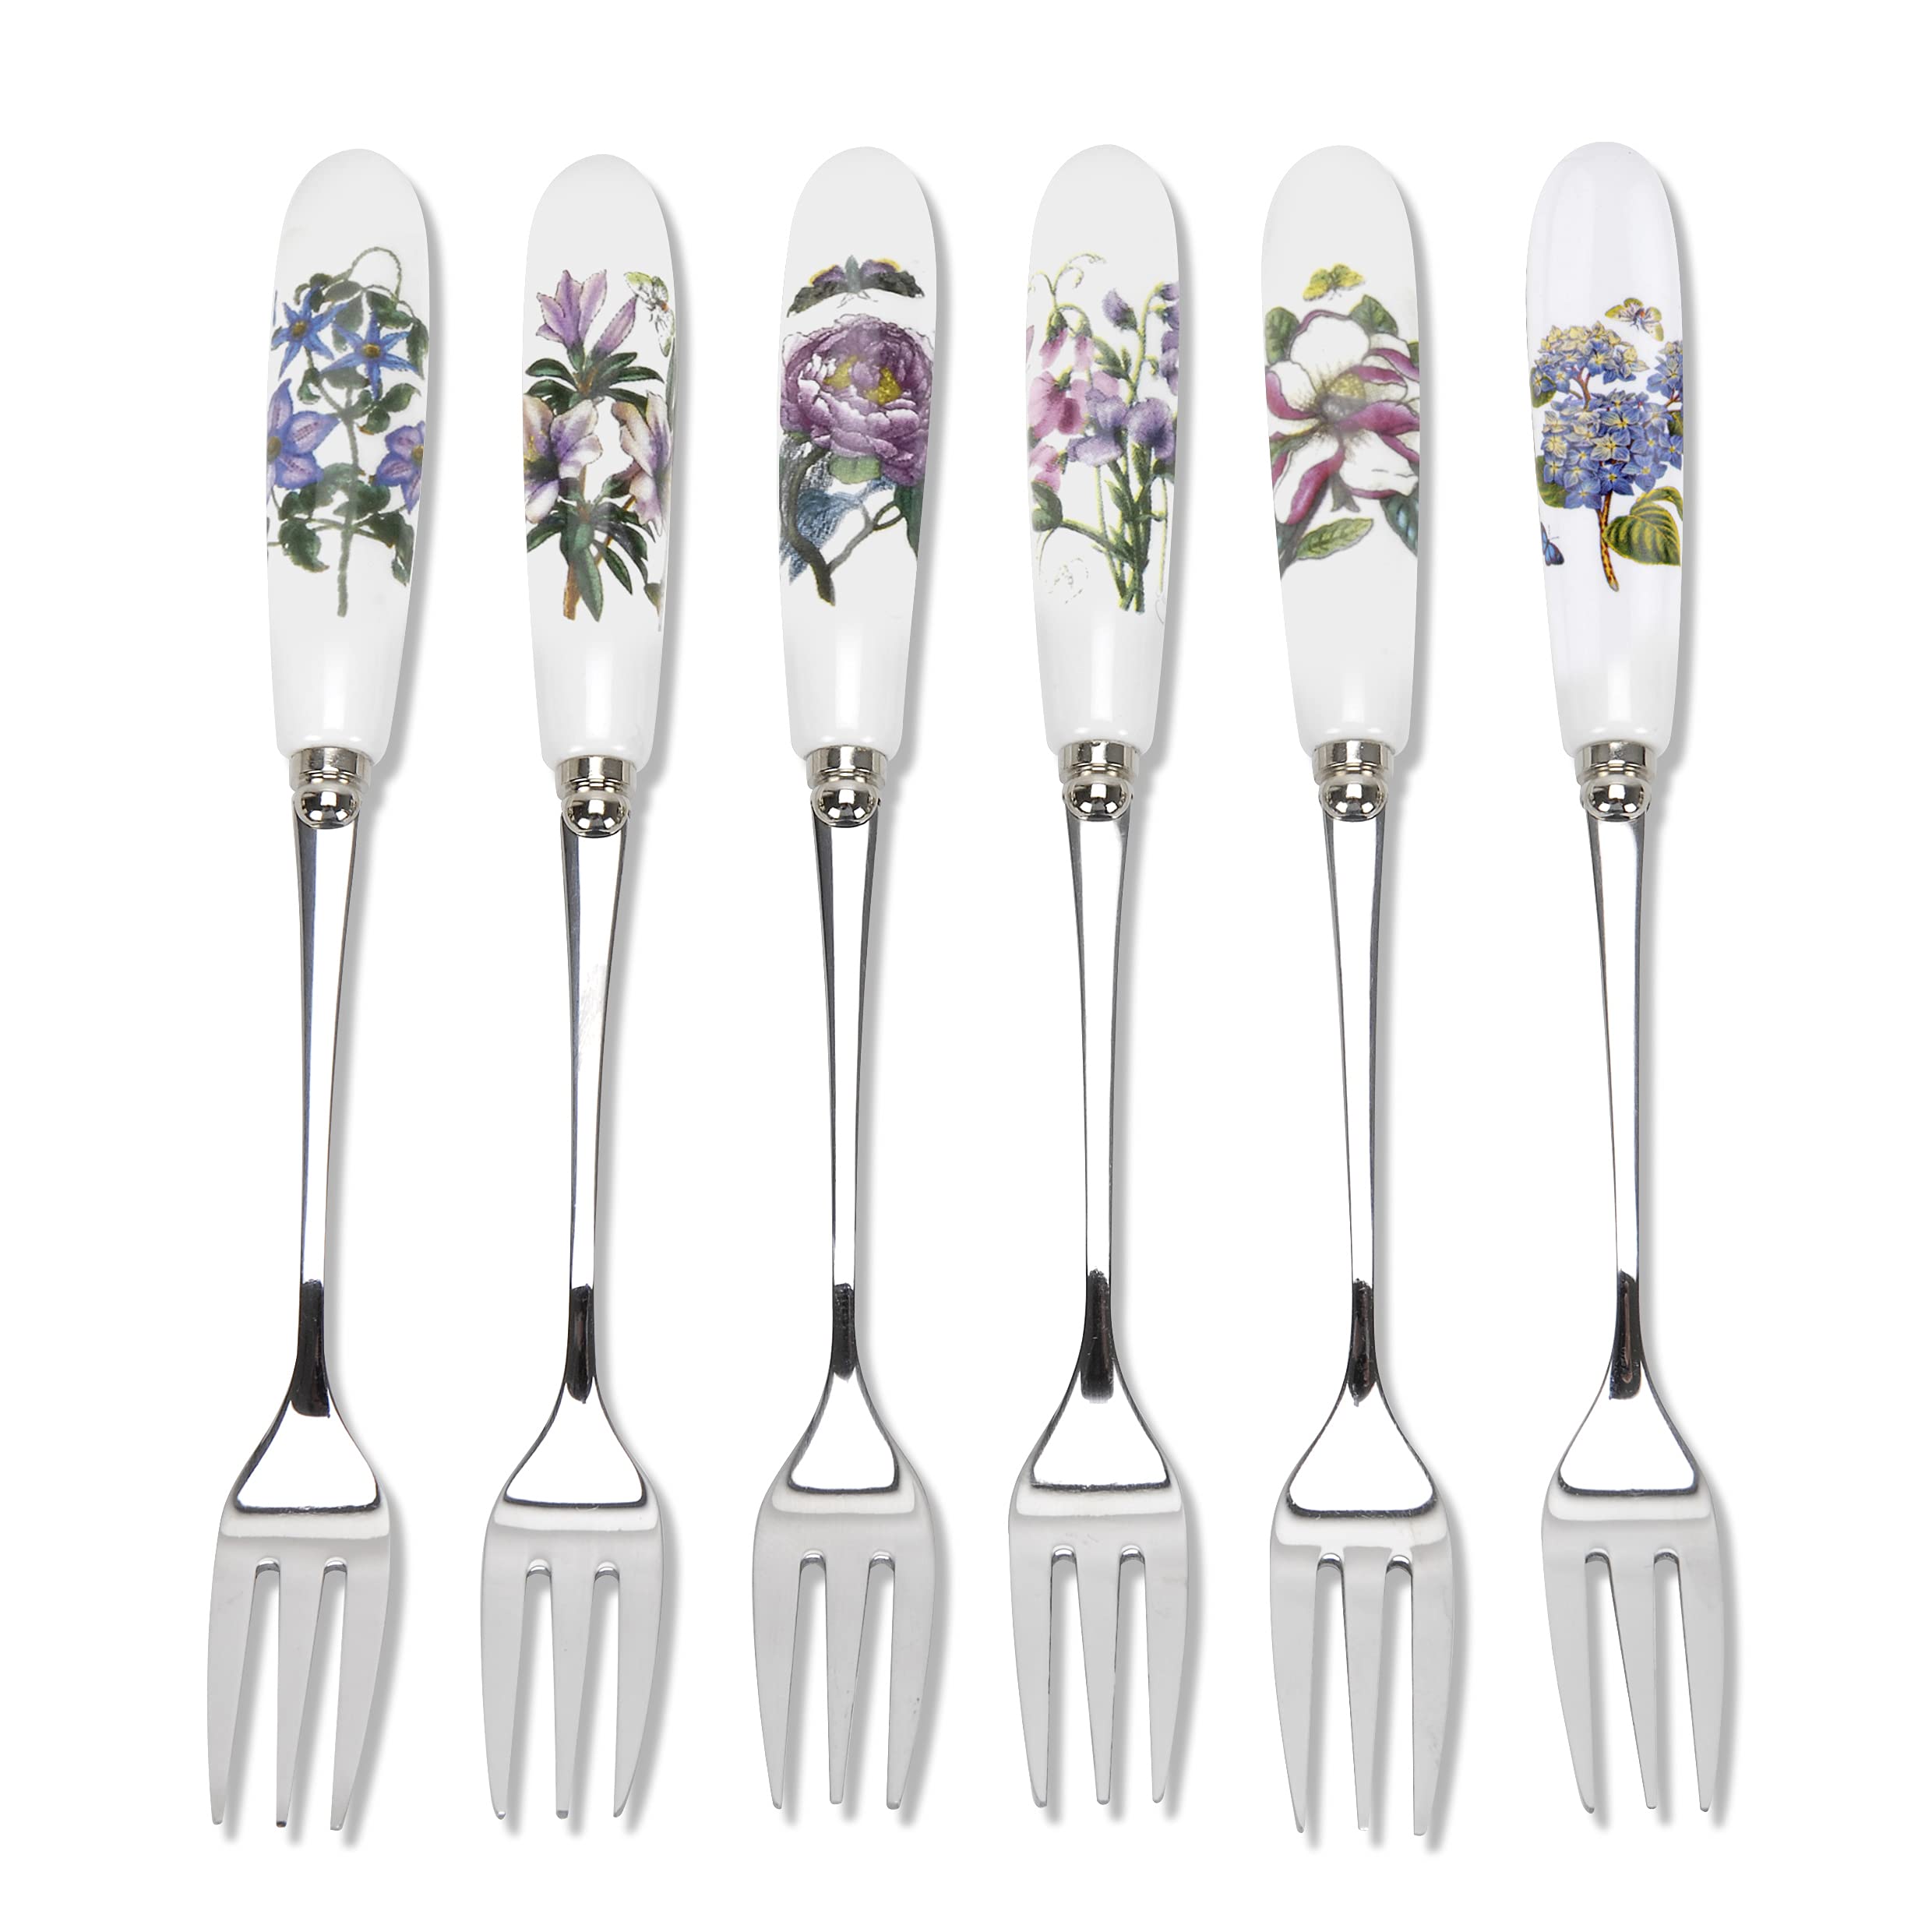 Portmeirion Botanic Garden Pastry Forks | 6 Inch Dessert Forks | Set of 6 Forks with Assorted Floral Motifs | Made from Stainless Steel with Porcelain Handles